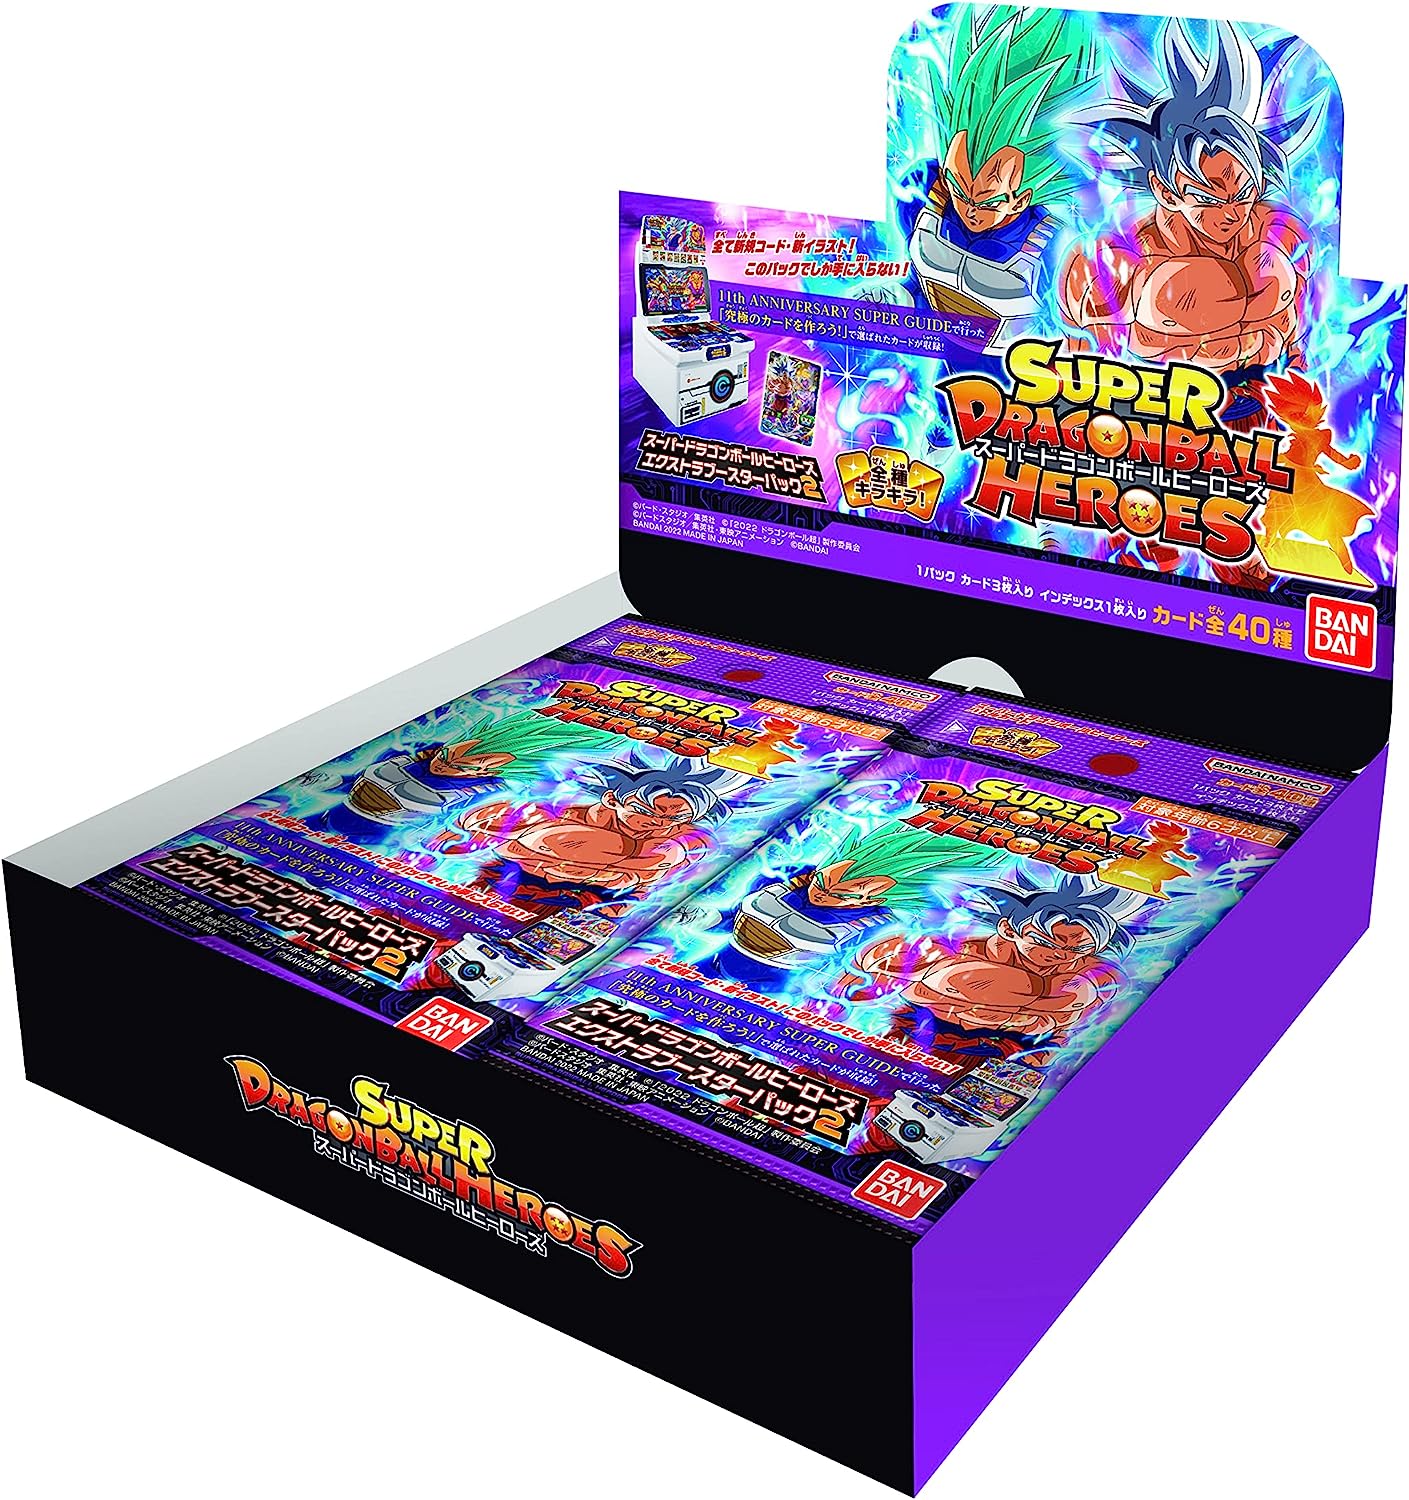 BANDAI SUPER DRAGON BALL HEROES EXTRA BOOSTER PACK 2 (BOITE)